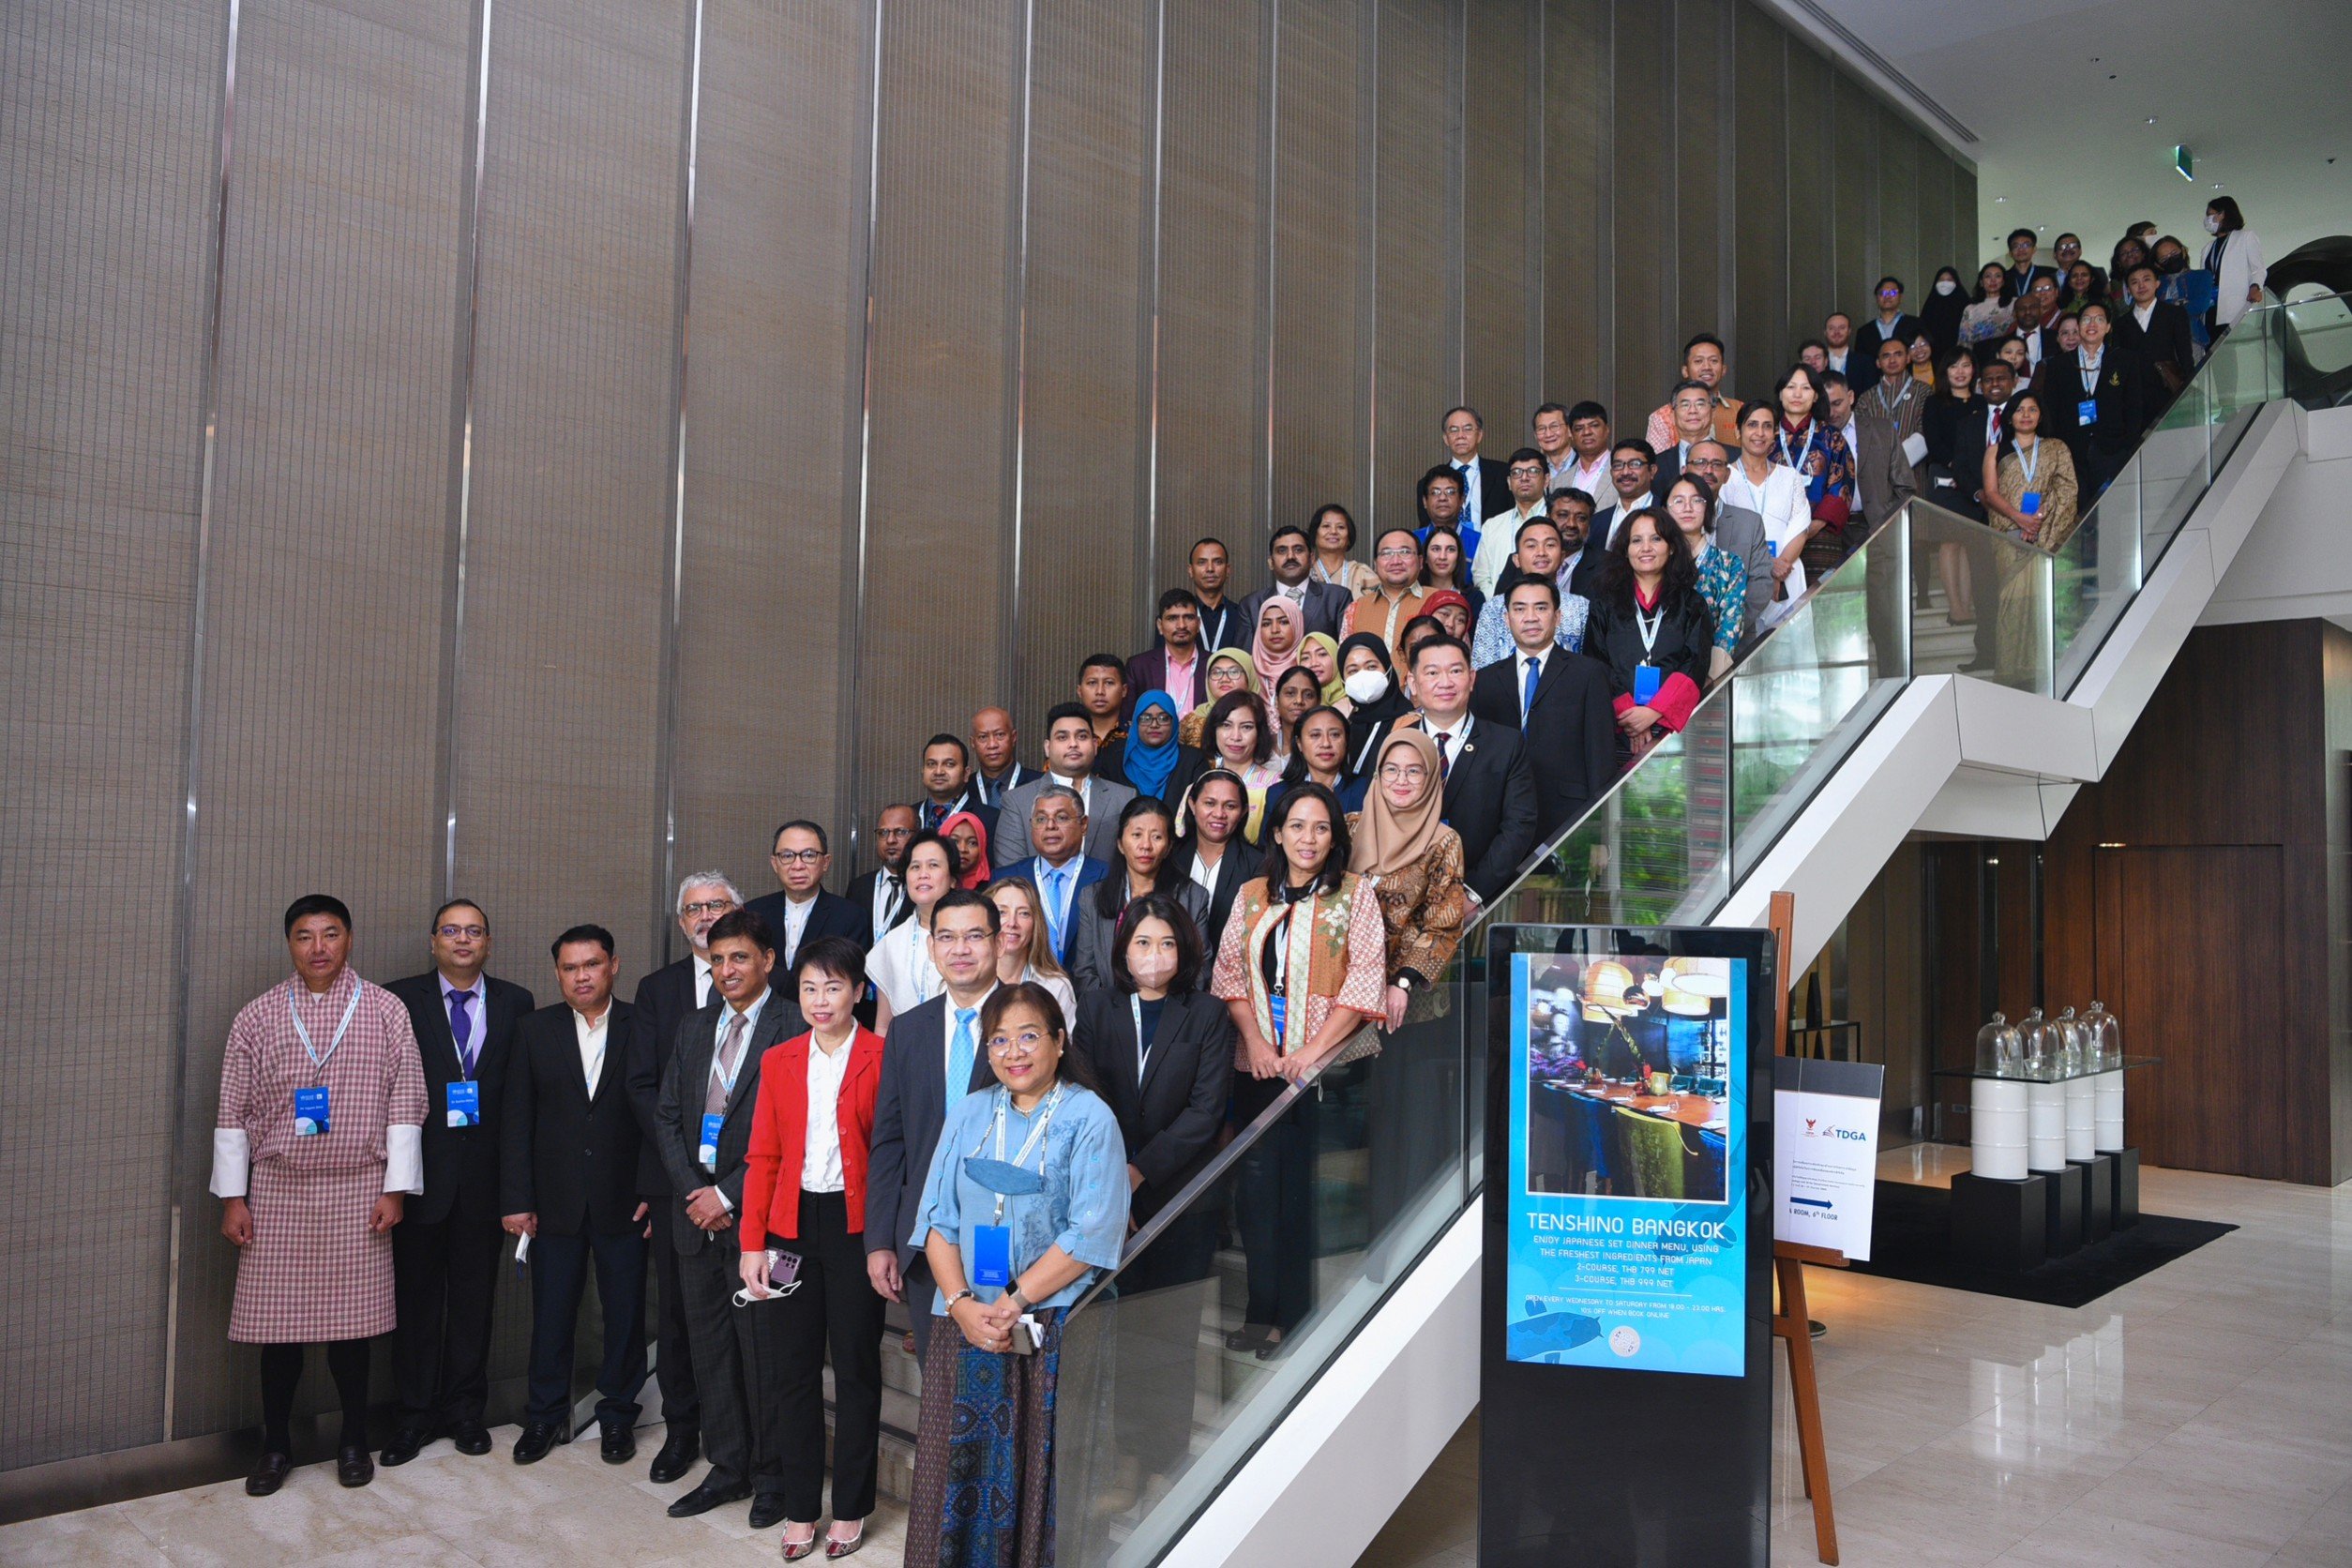 ThaiHealth and WHO South East Asia Region join forces to promote healthy lifestyles in South and East Asian urban communities thaihealth